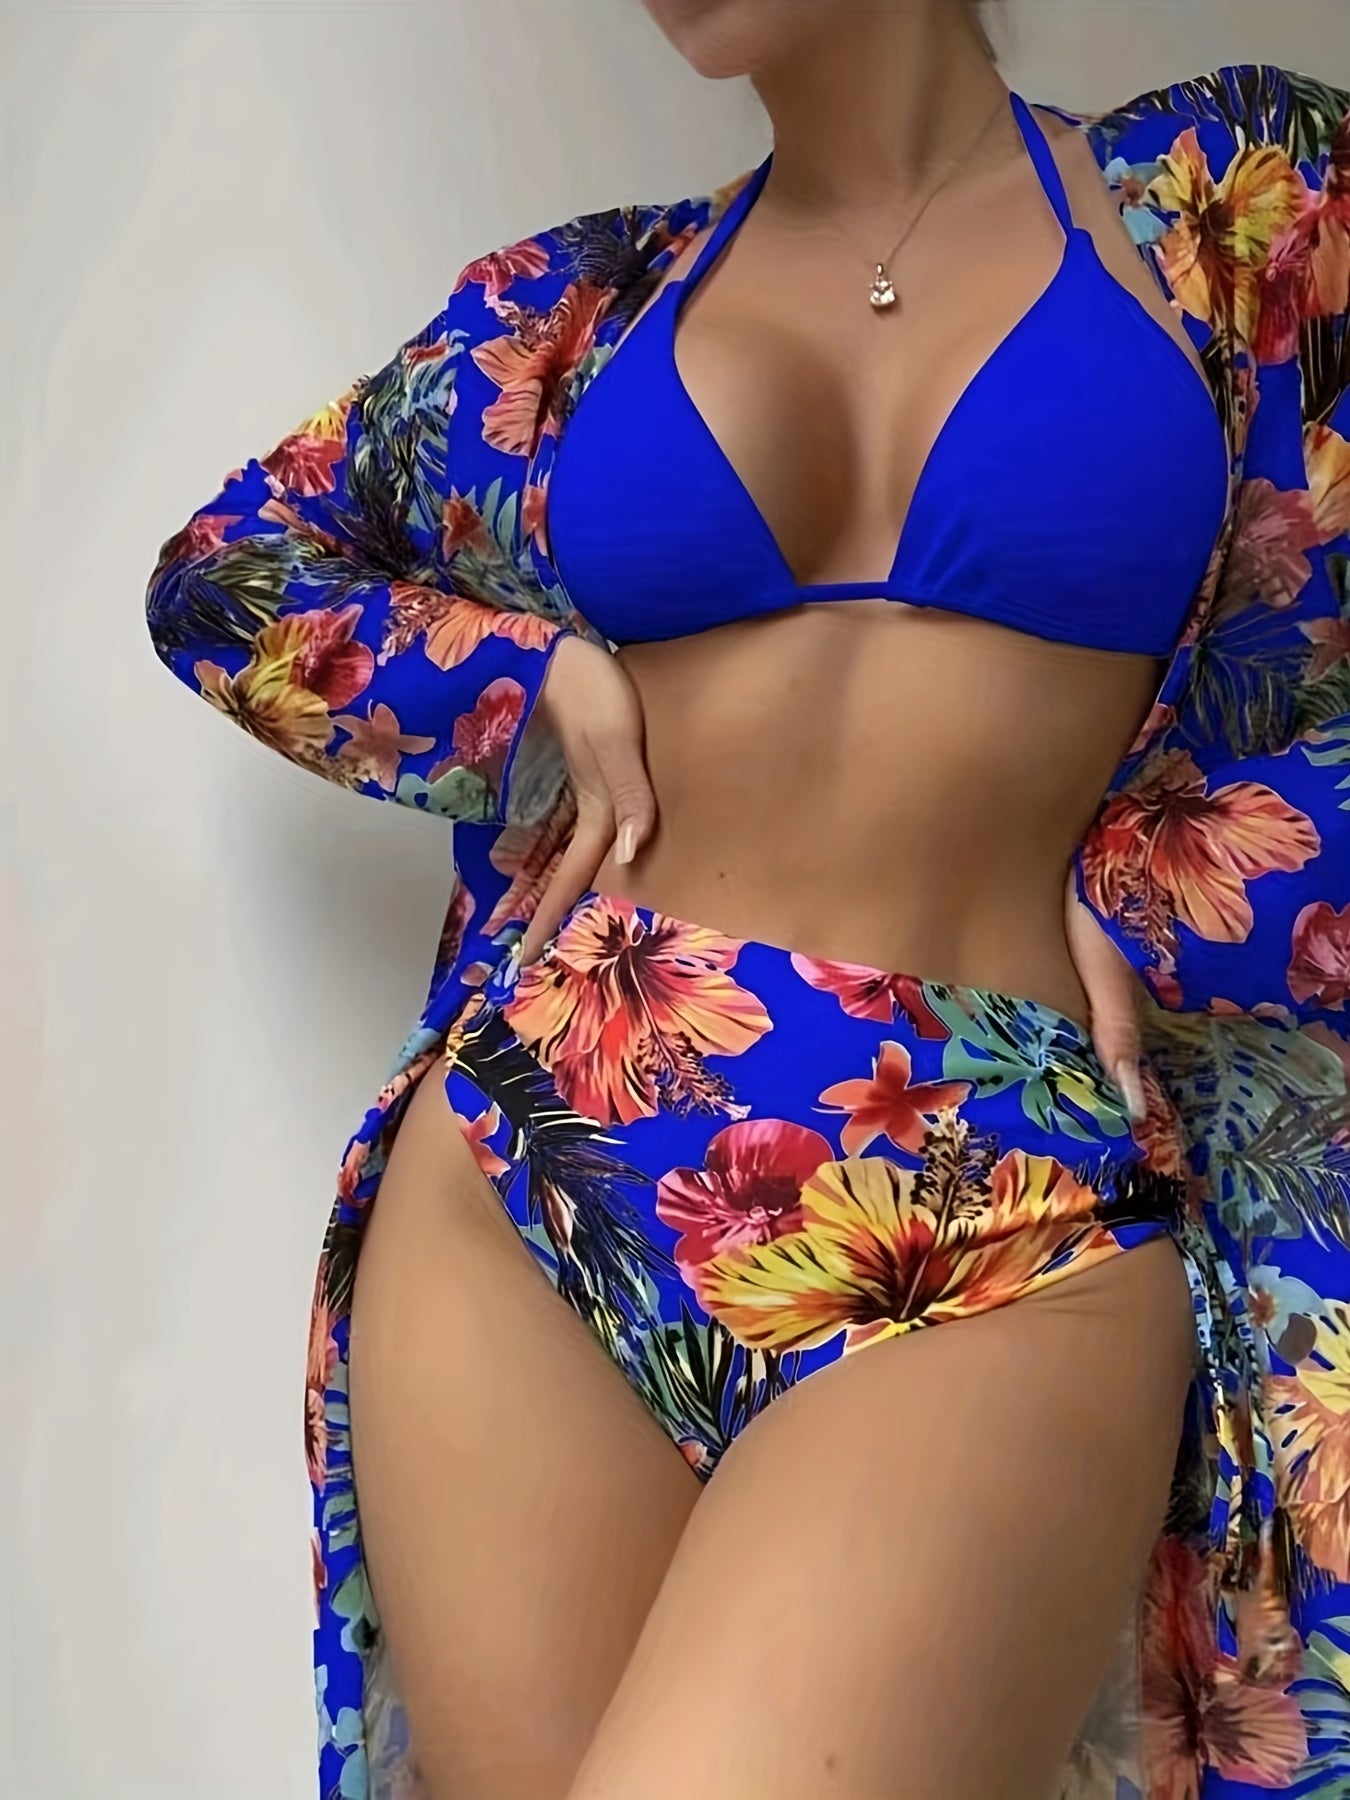 Vzyzv 3-Pieces Tropical Print Bikini Sets, Halter Neck Tie Back Tie Side High Cut With Cover Up Shirt Swimsuit, Women's Swimwear & Clothing